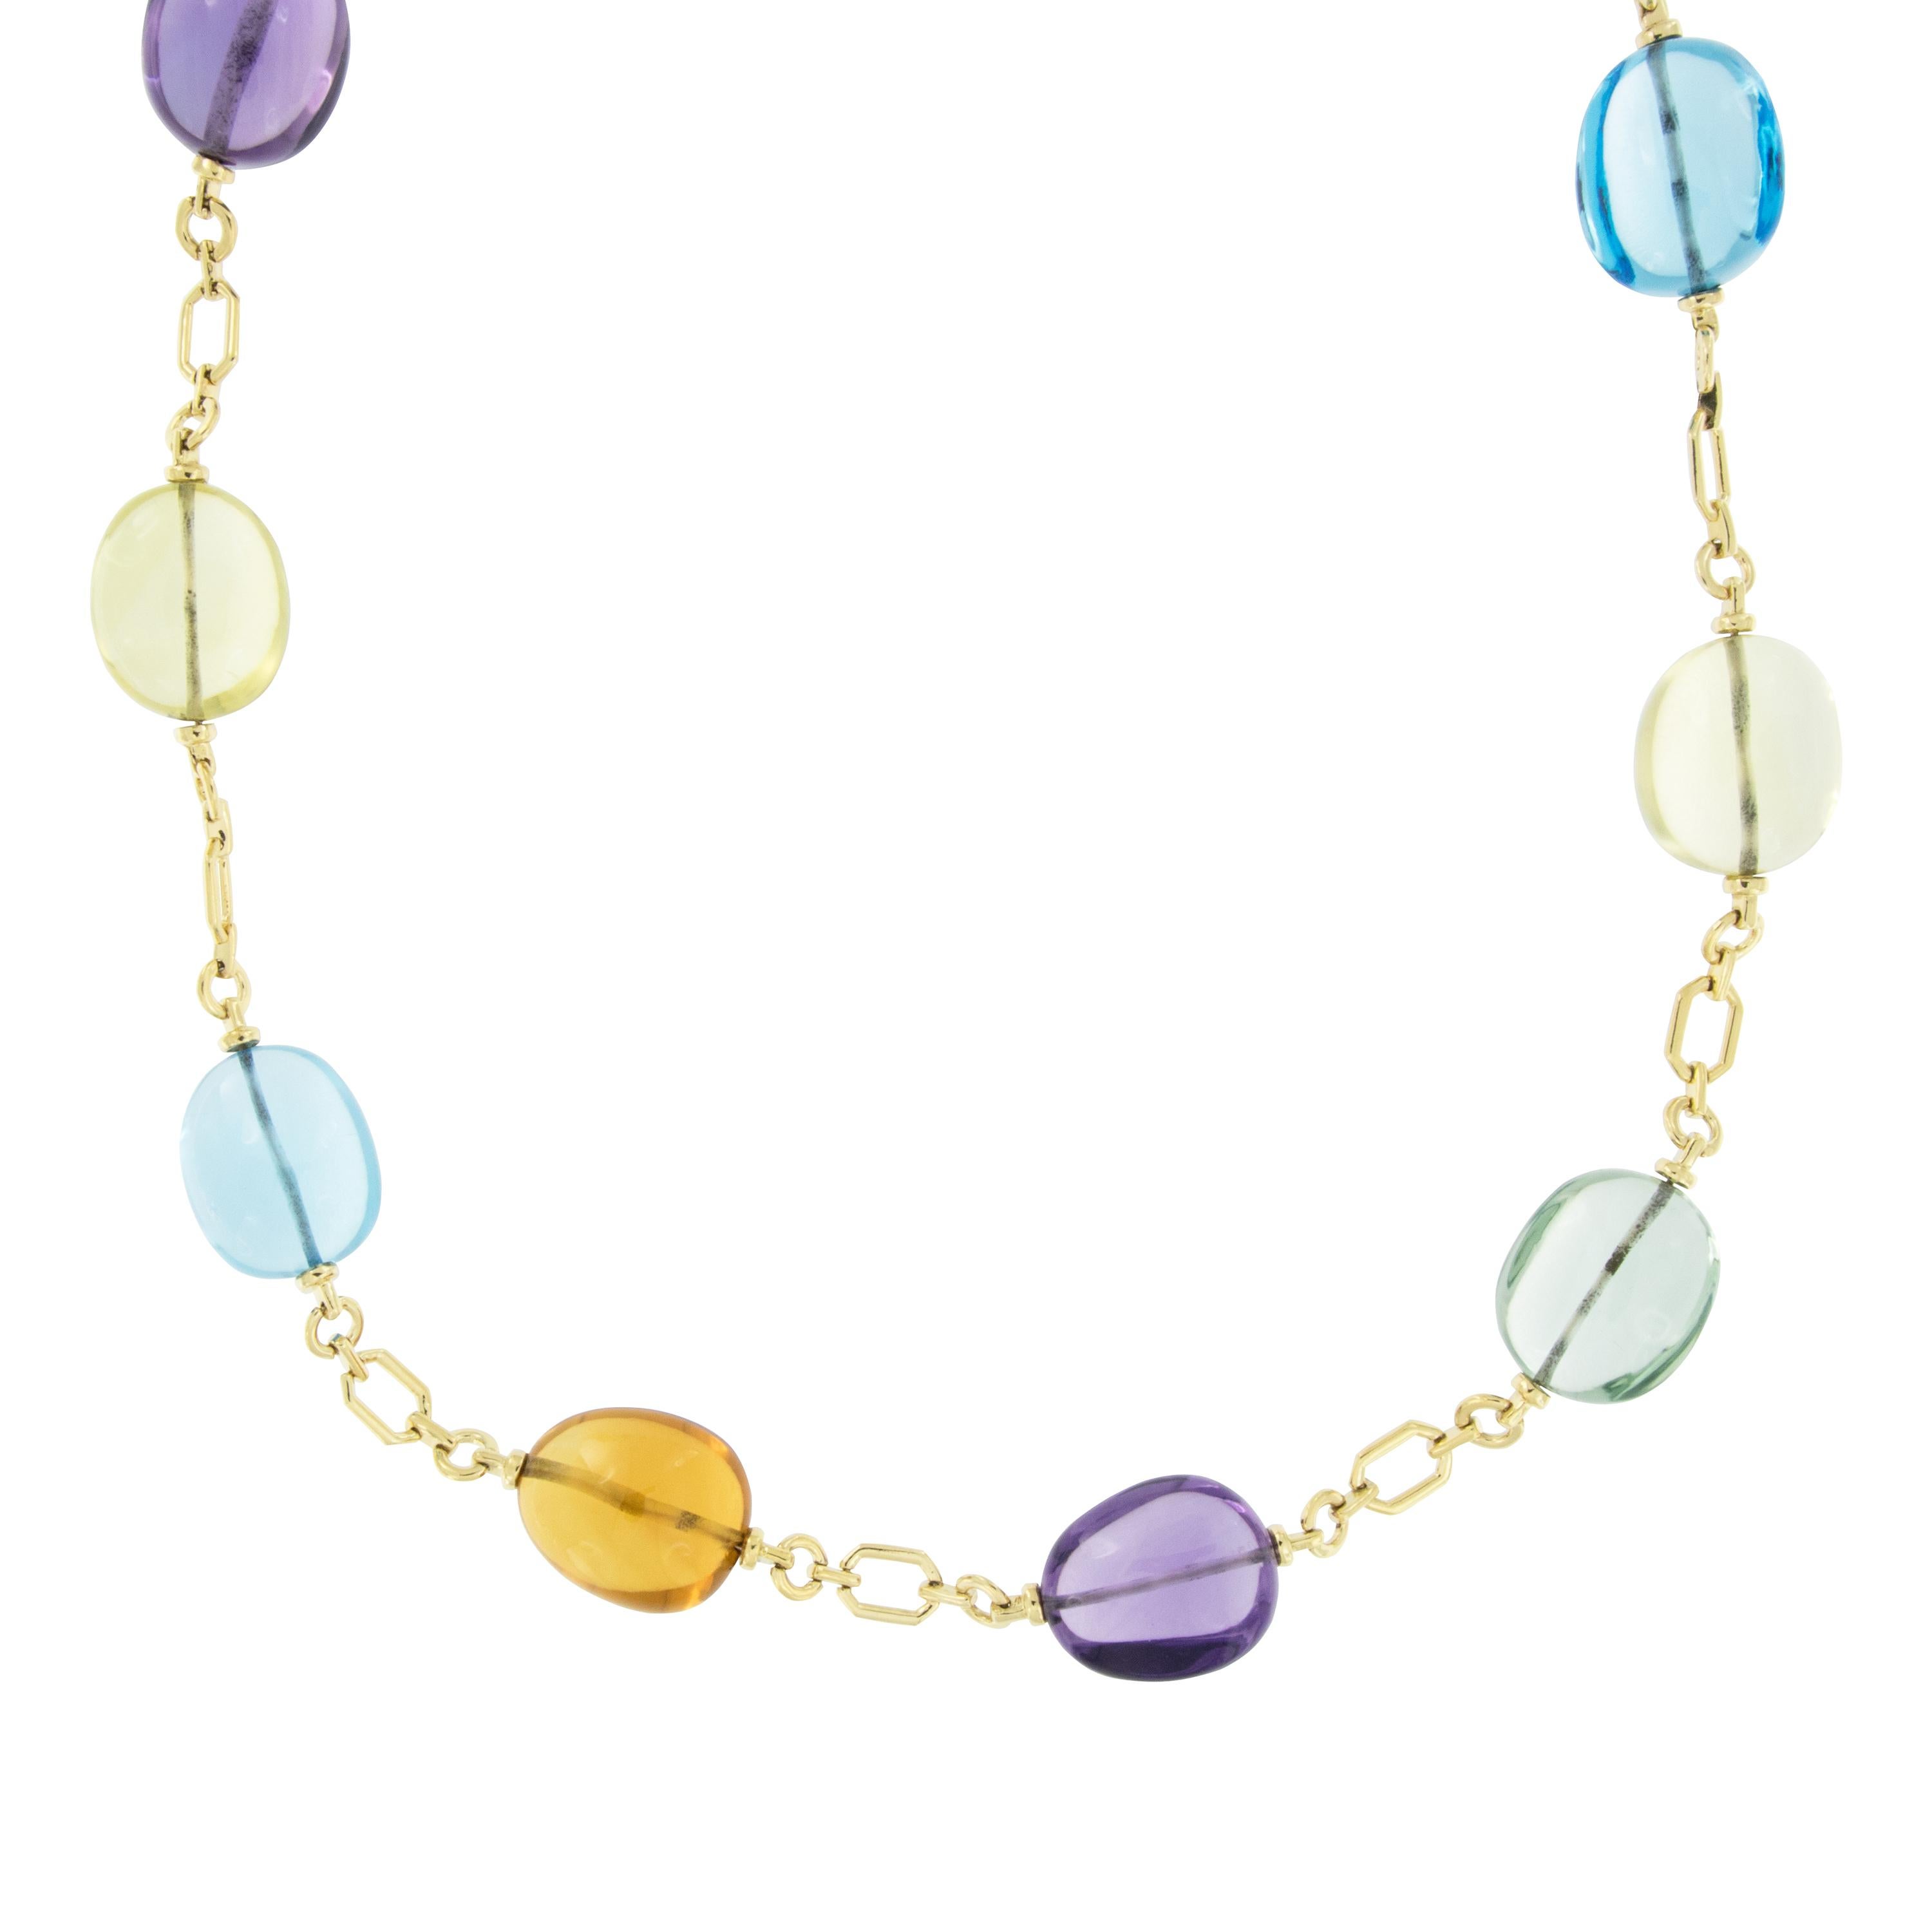 Goshwara, a term for perfect shape, is a company known for exceptional color gems and this necklace exemplifies the term! Softly tumbled shapes in every hue decorates this station necklace with 18 karat yellow gold stylish geometric links in